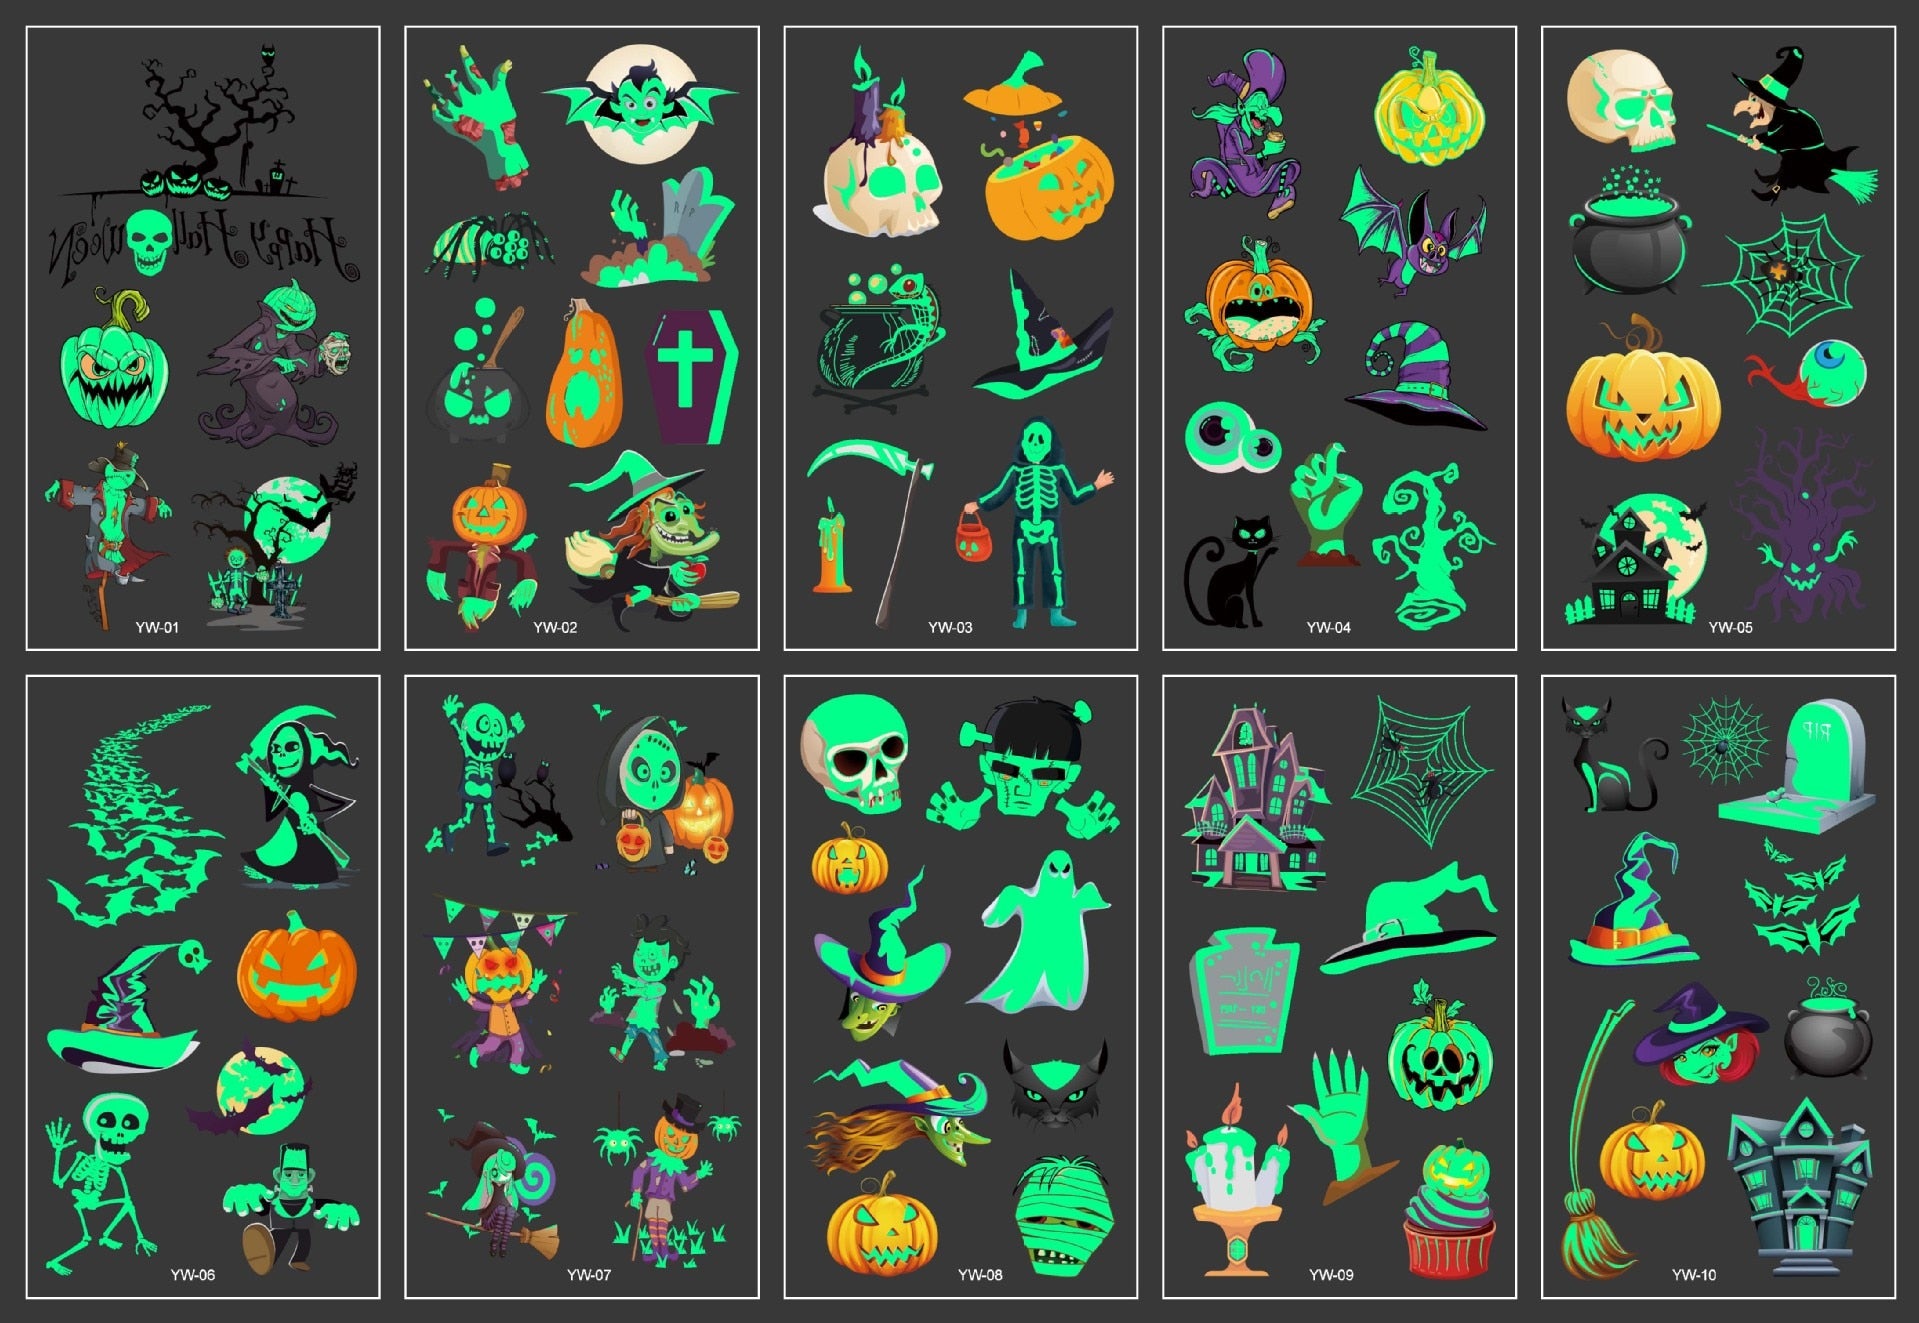 10 Sheets Each New Halloween Decoration  Luminous Tattoo Stickers Bar Party Shiny Unique Bat Pumpkin Skull Witch